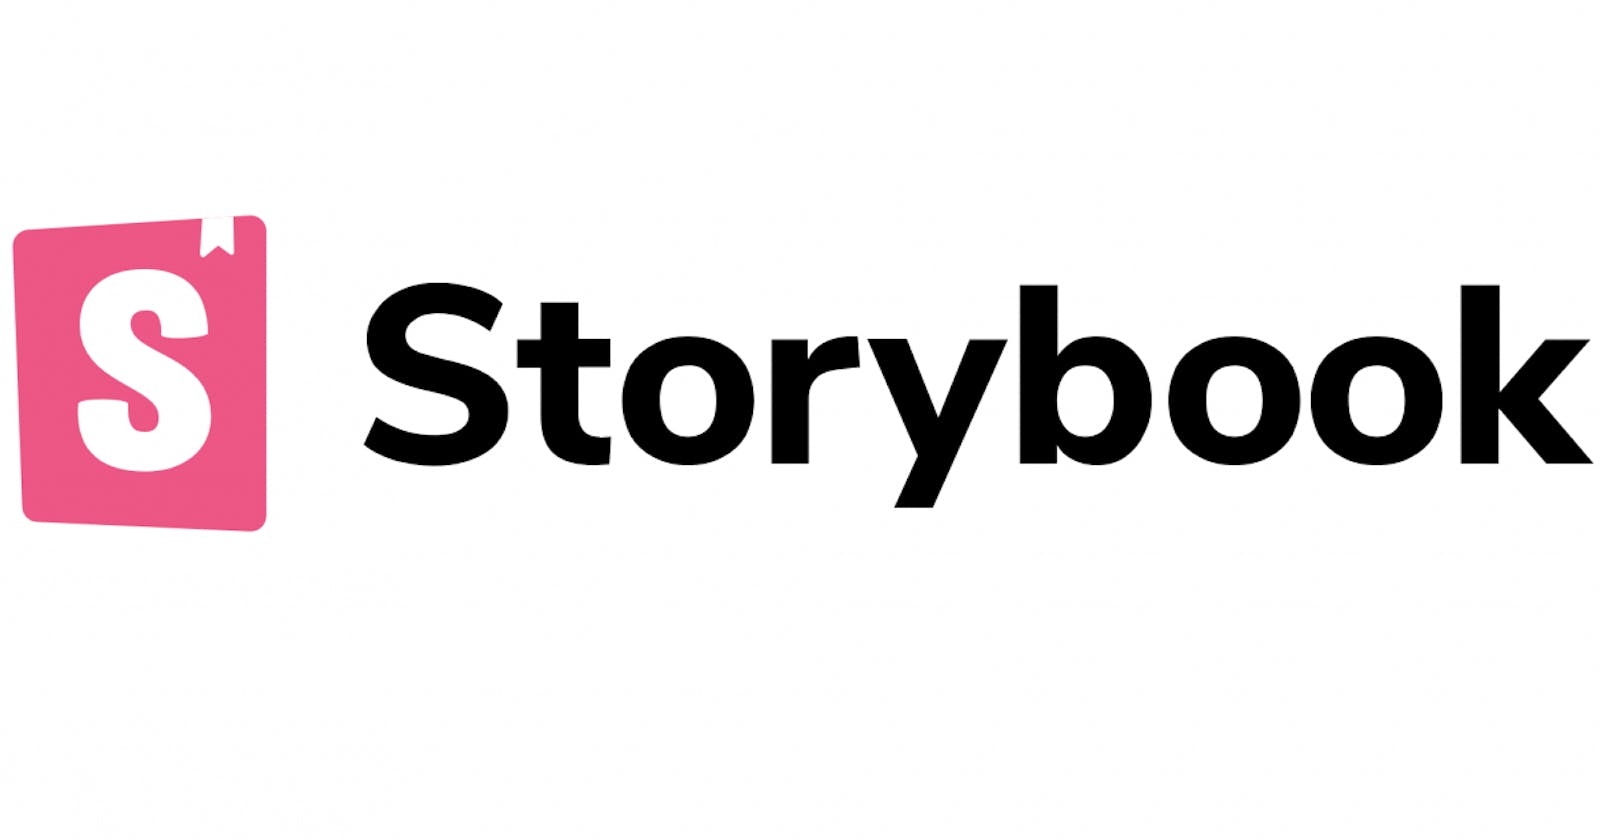 Build component library using Storybook